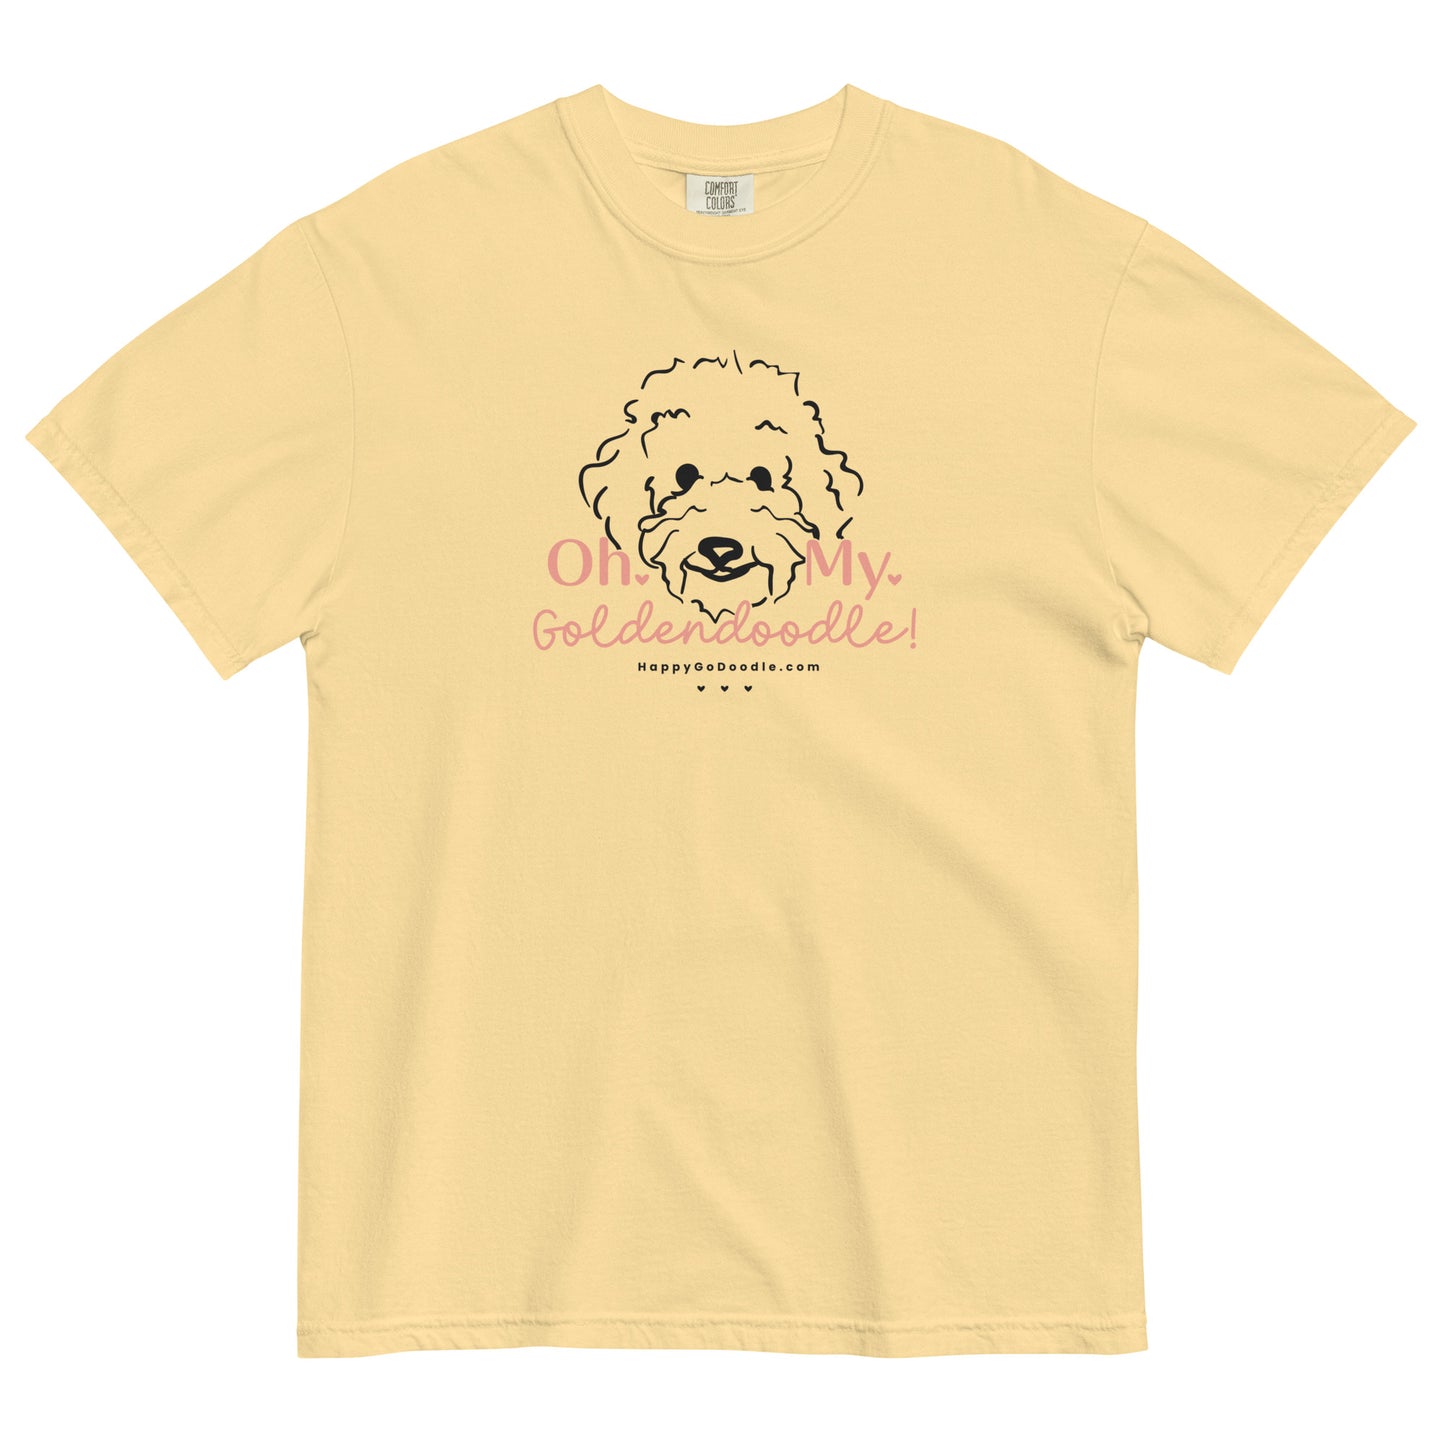 Goldendoodle comfort colors t-shirt with Goldendoodle dog face and words "Oh My Goldendoodle" in butter color